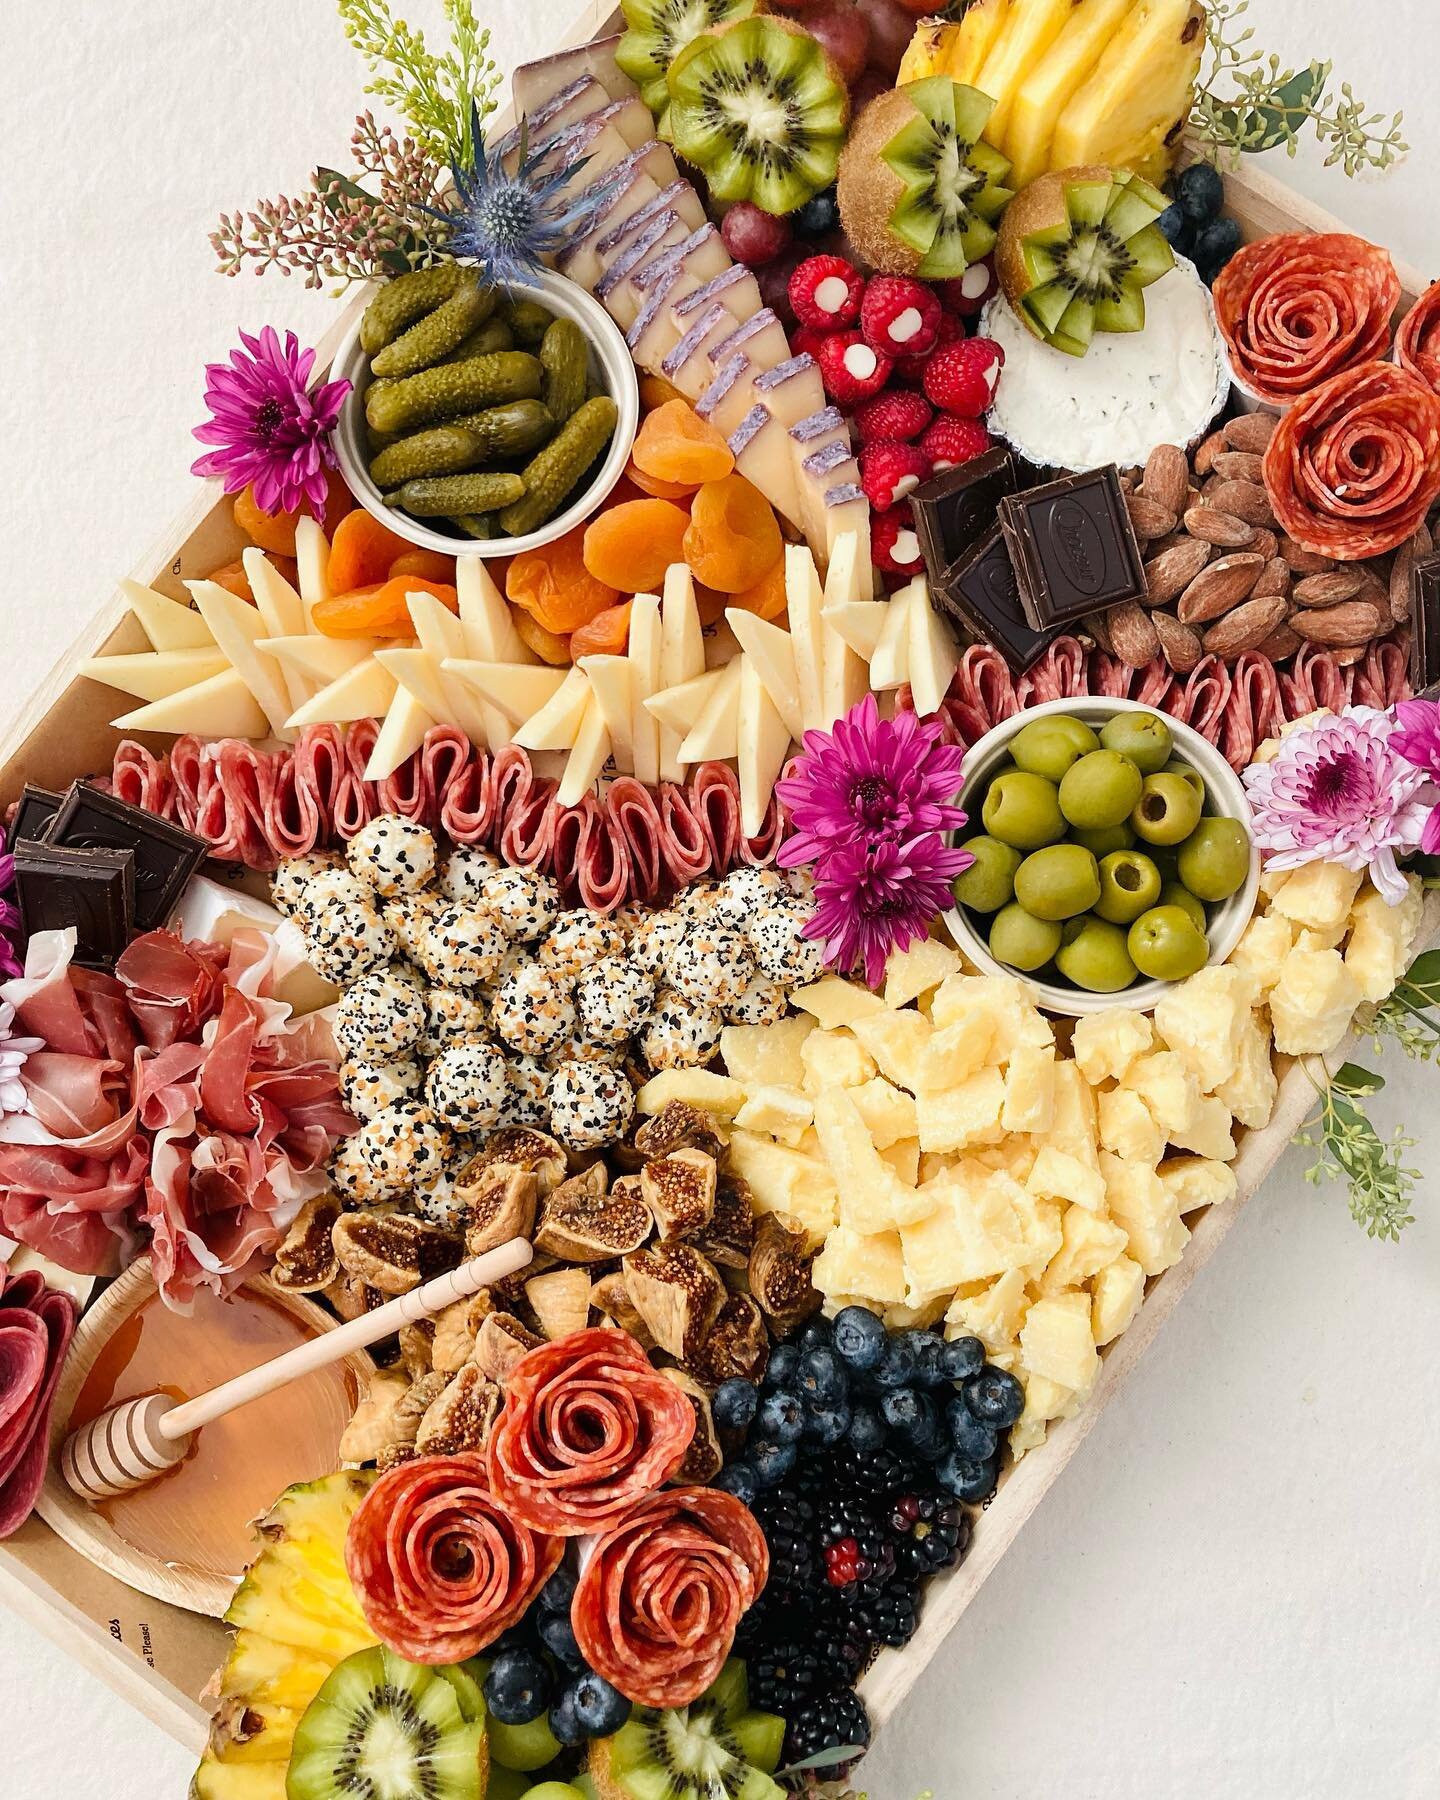 How many rivers are on this charcuterie board?